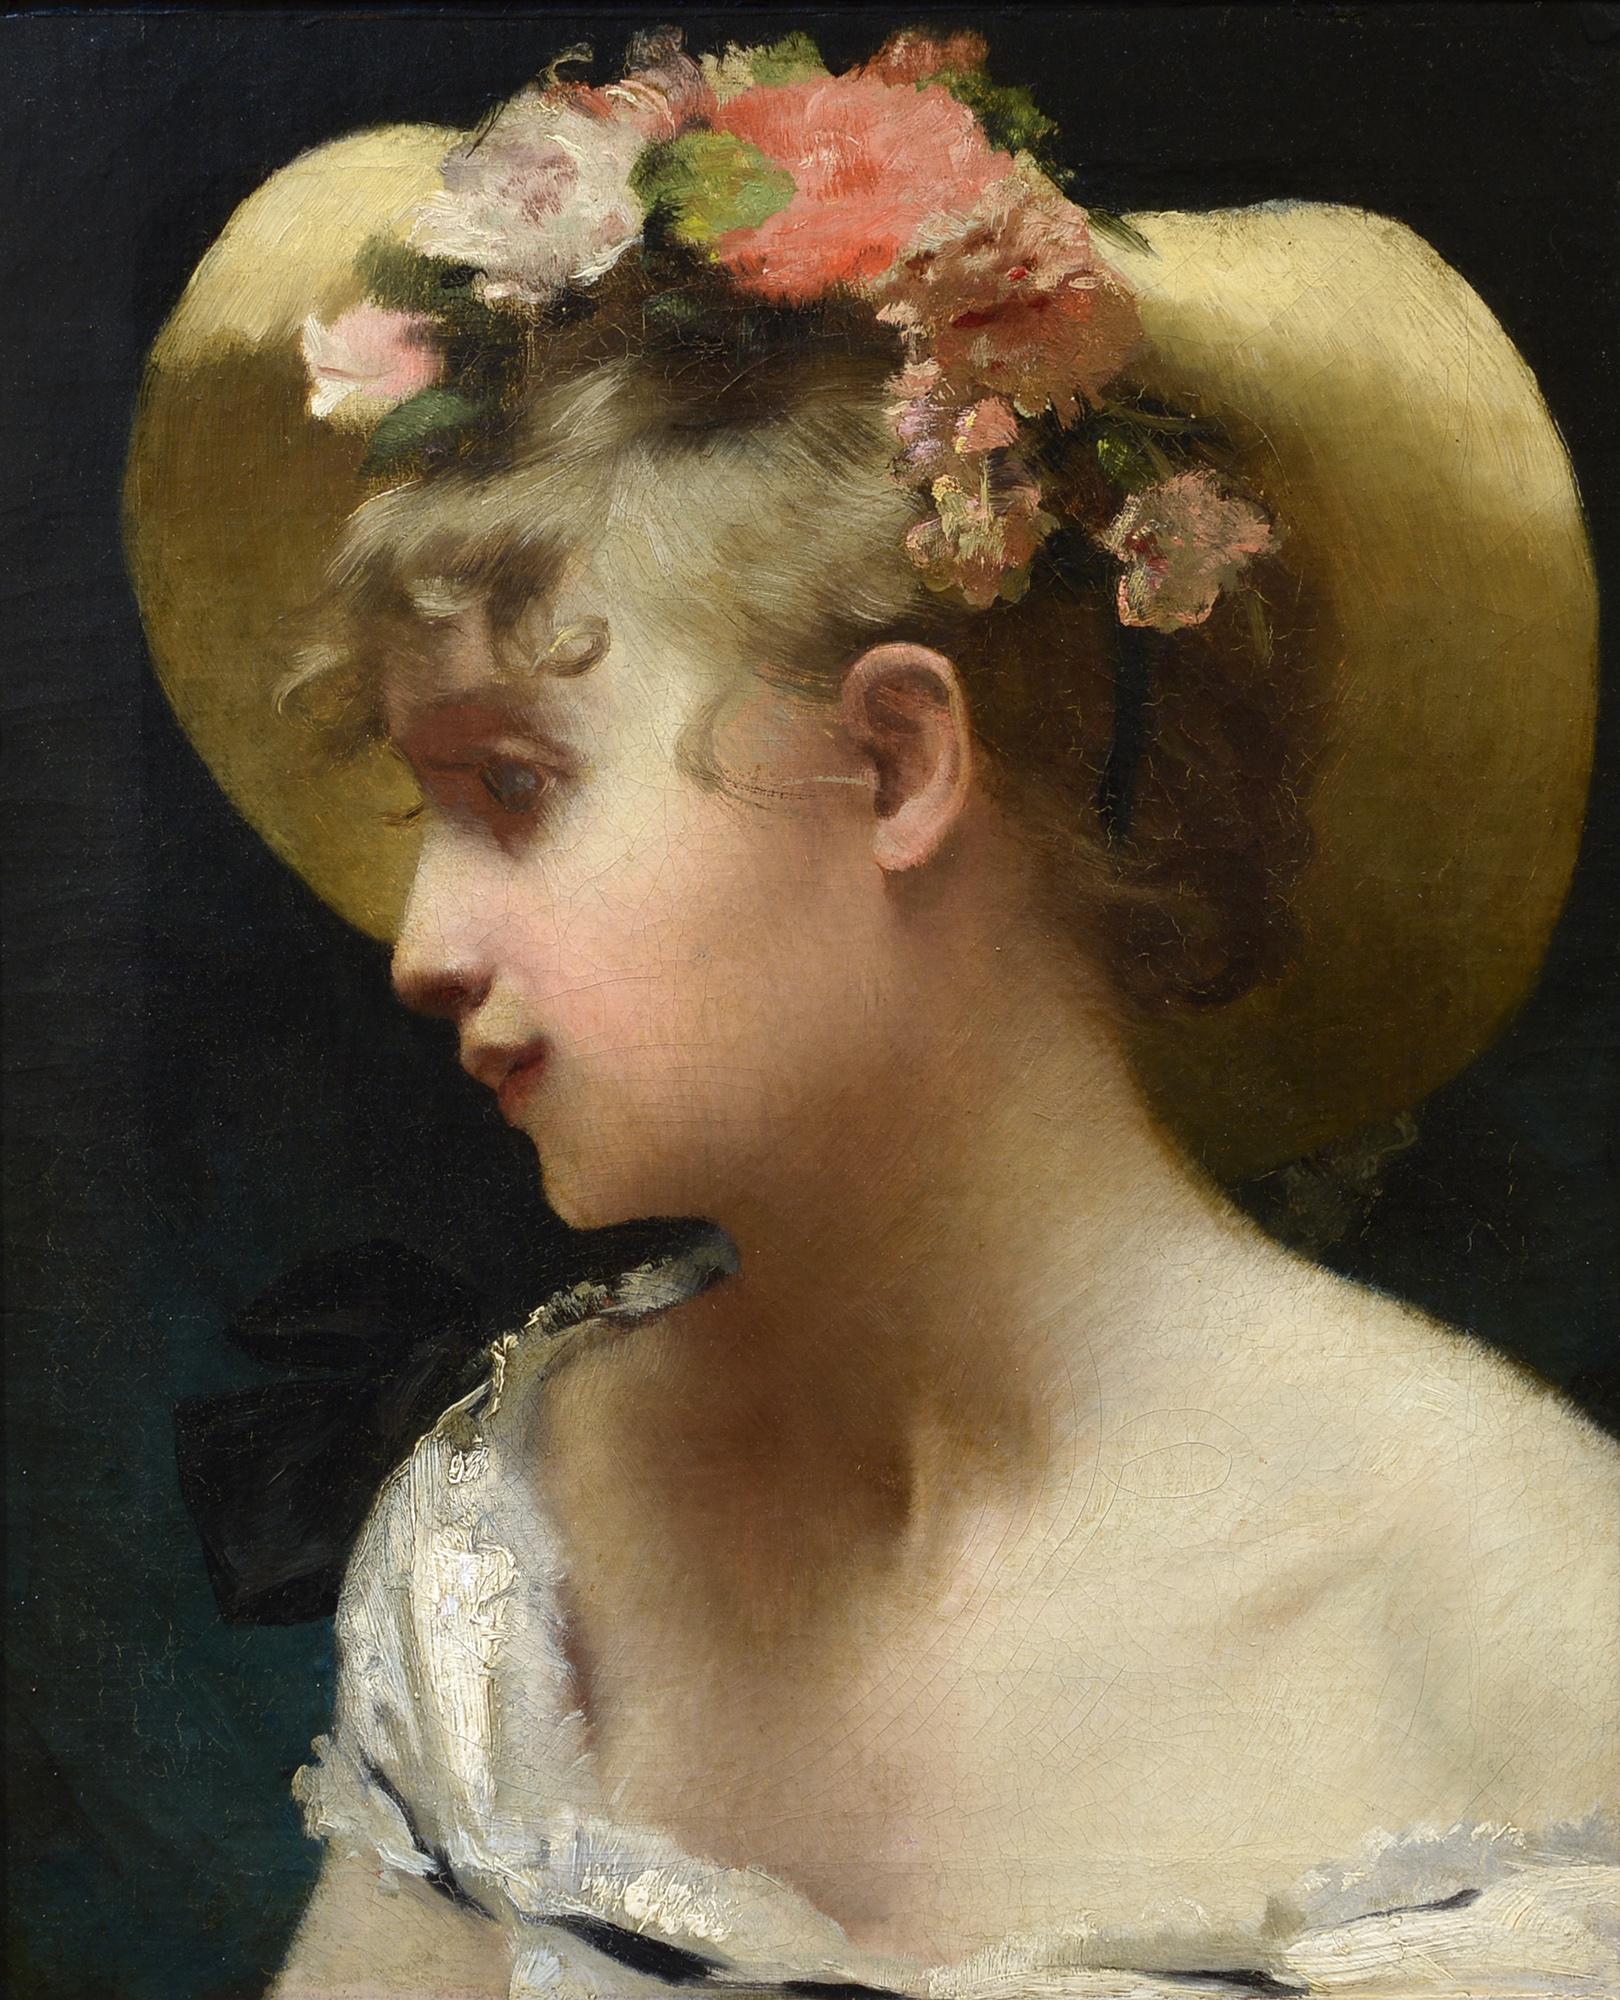 Etienne Adolphe Piot Portrait Painting - "Young Woman in a Flowered Hat" Late 19th Century French Impressionist Oil